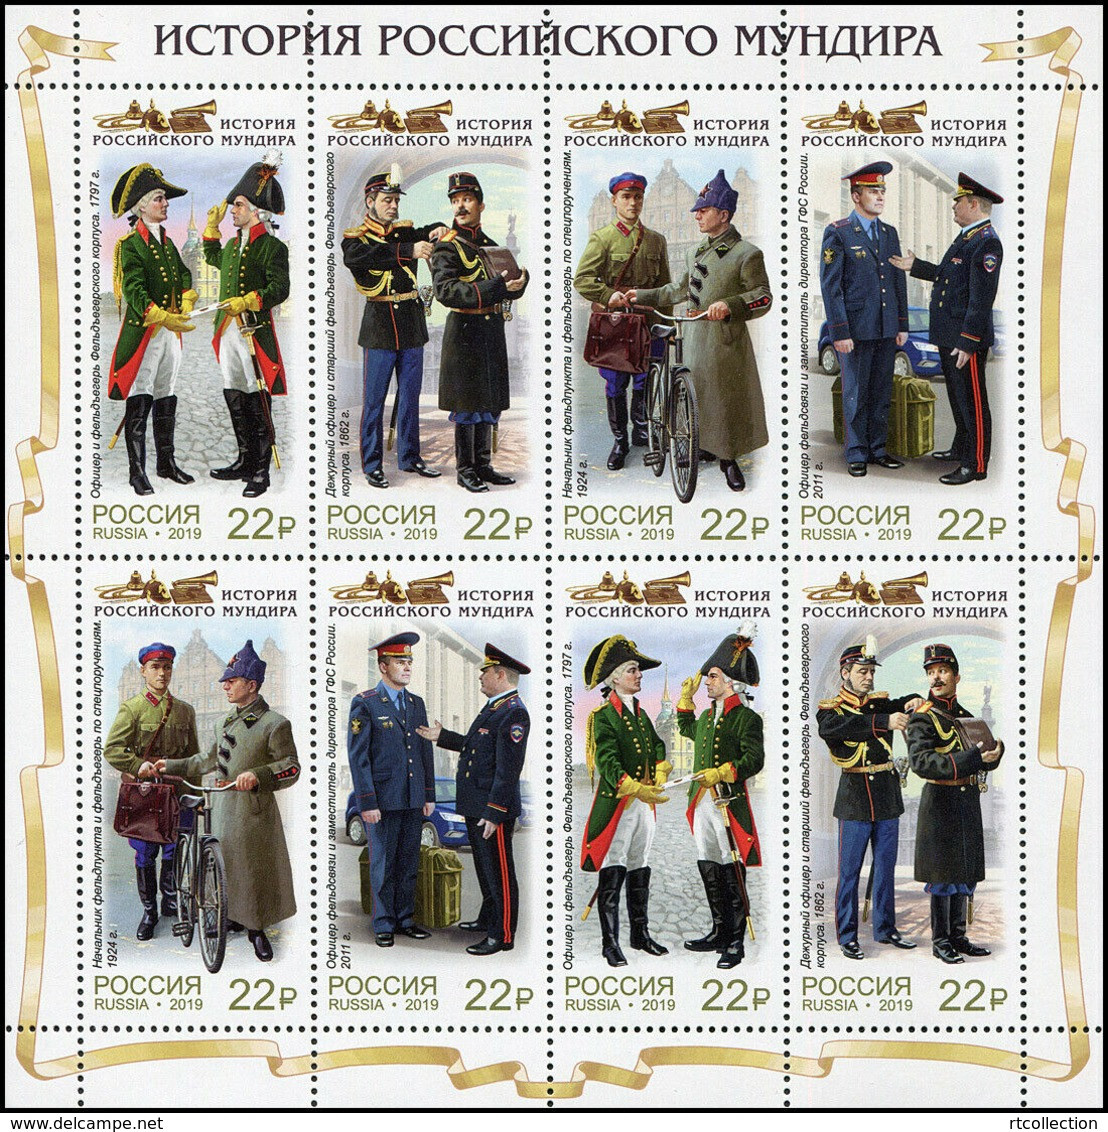 Russia 2019 M/S History Russian Uniform Jacket Diplomatic Customs Service Cloth Cultures Bycycle Military Stamps MNH - Full Sheets